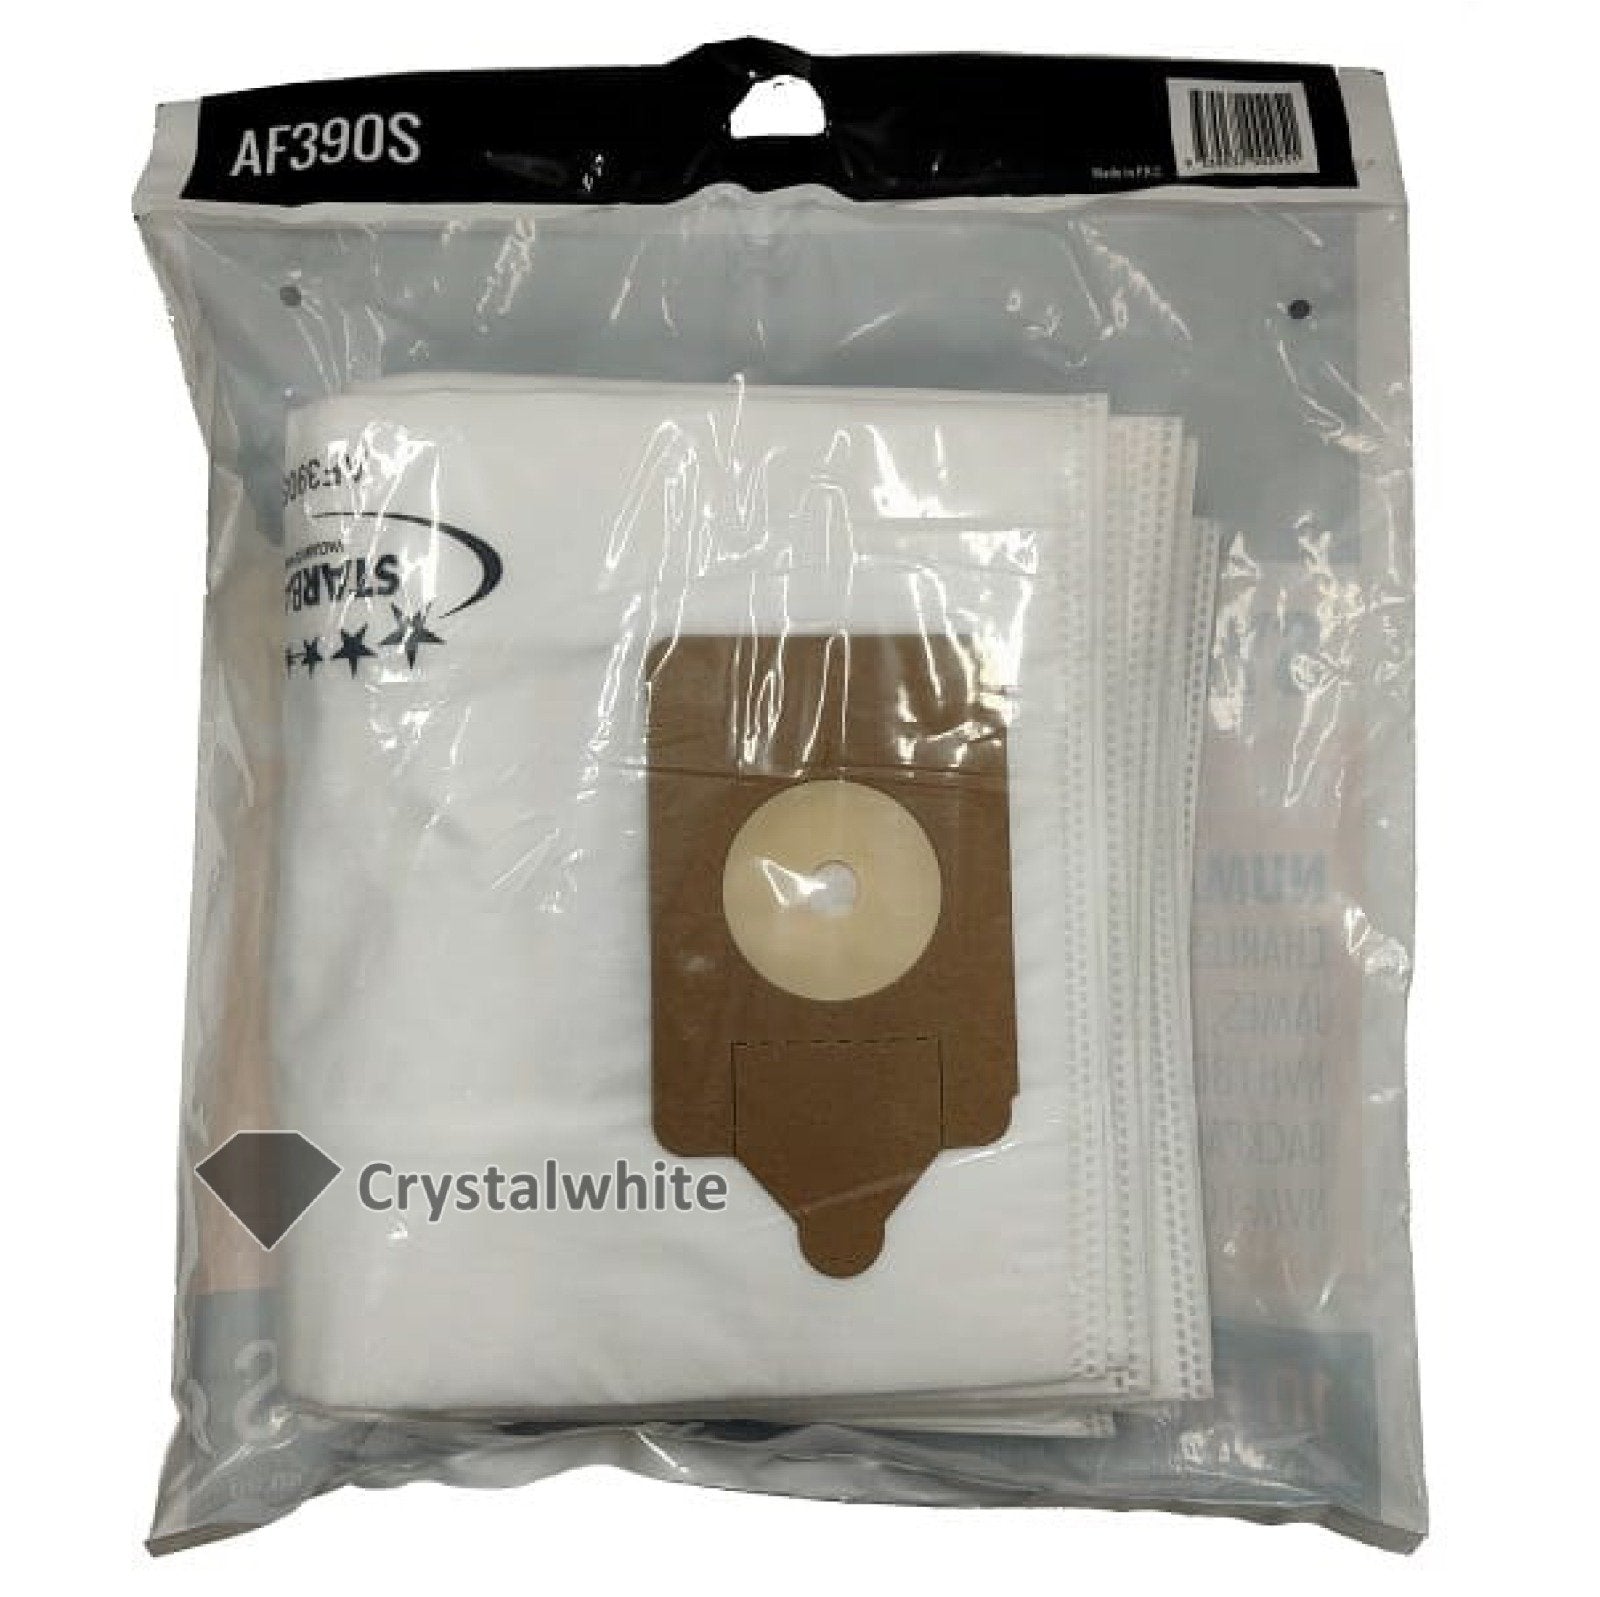 Starbag | AF390S Synthetic Vacuum Cleaner Bag | Crystalwhite Cleaning Supplies Melbourne